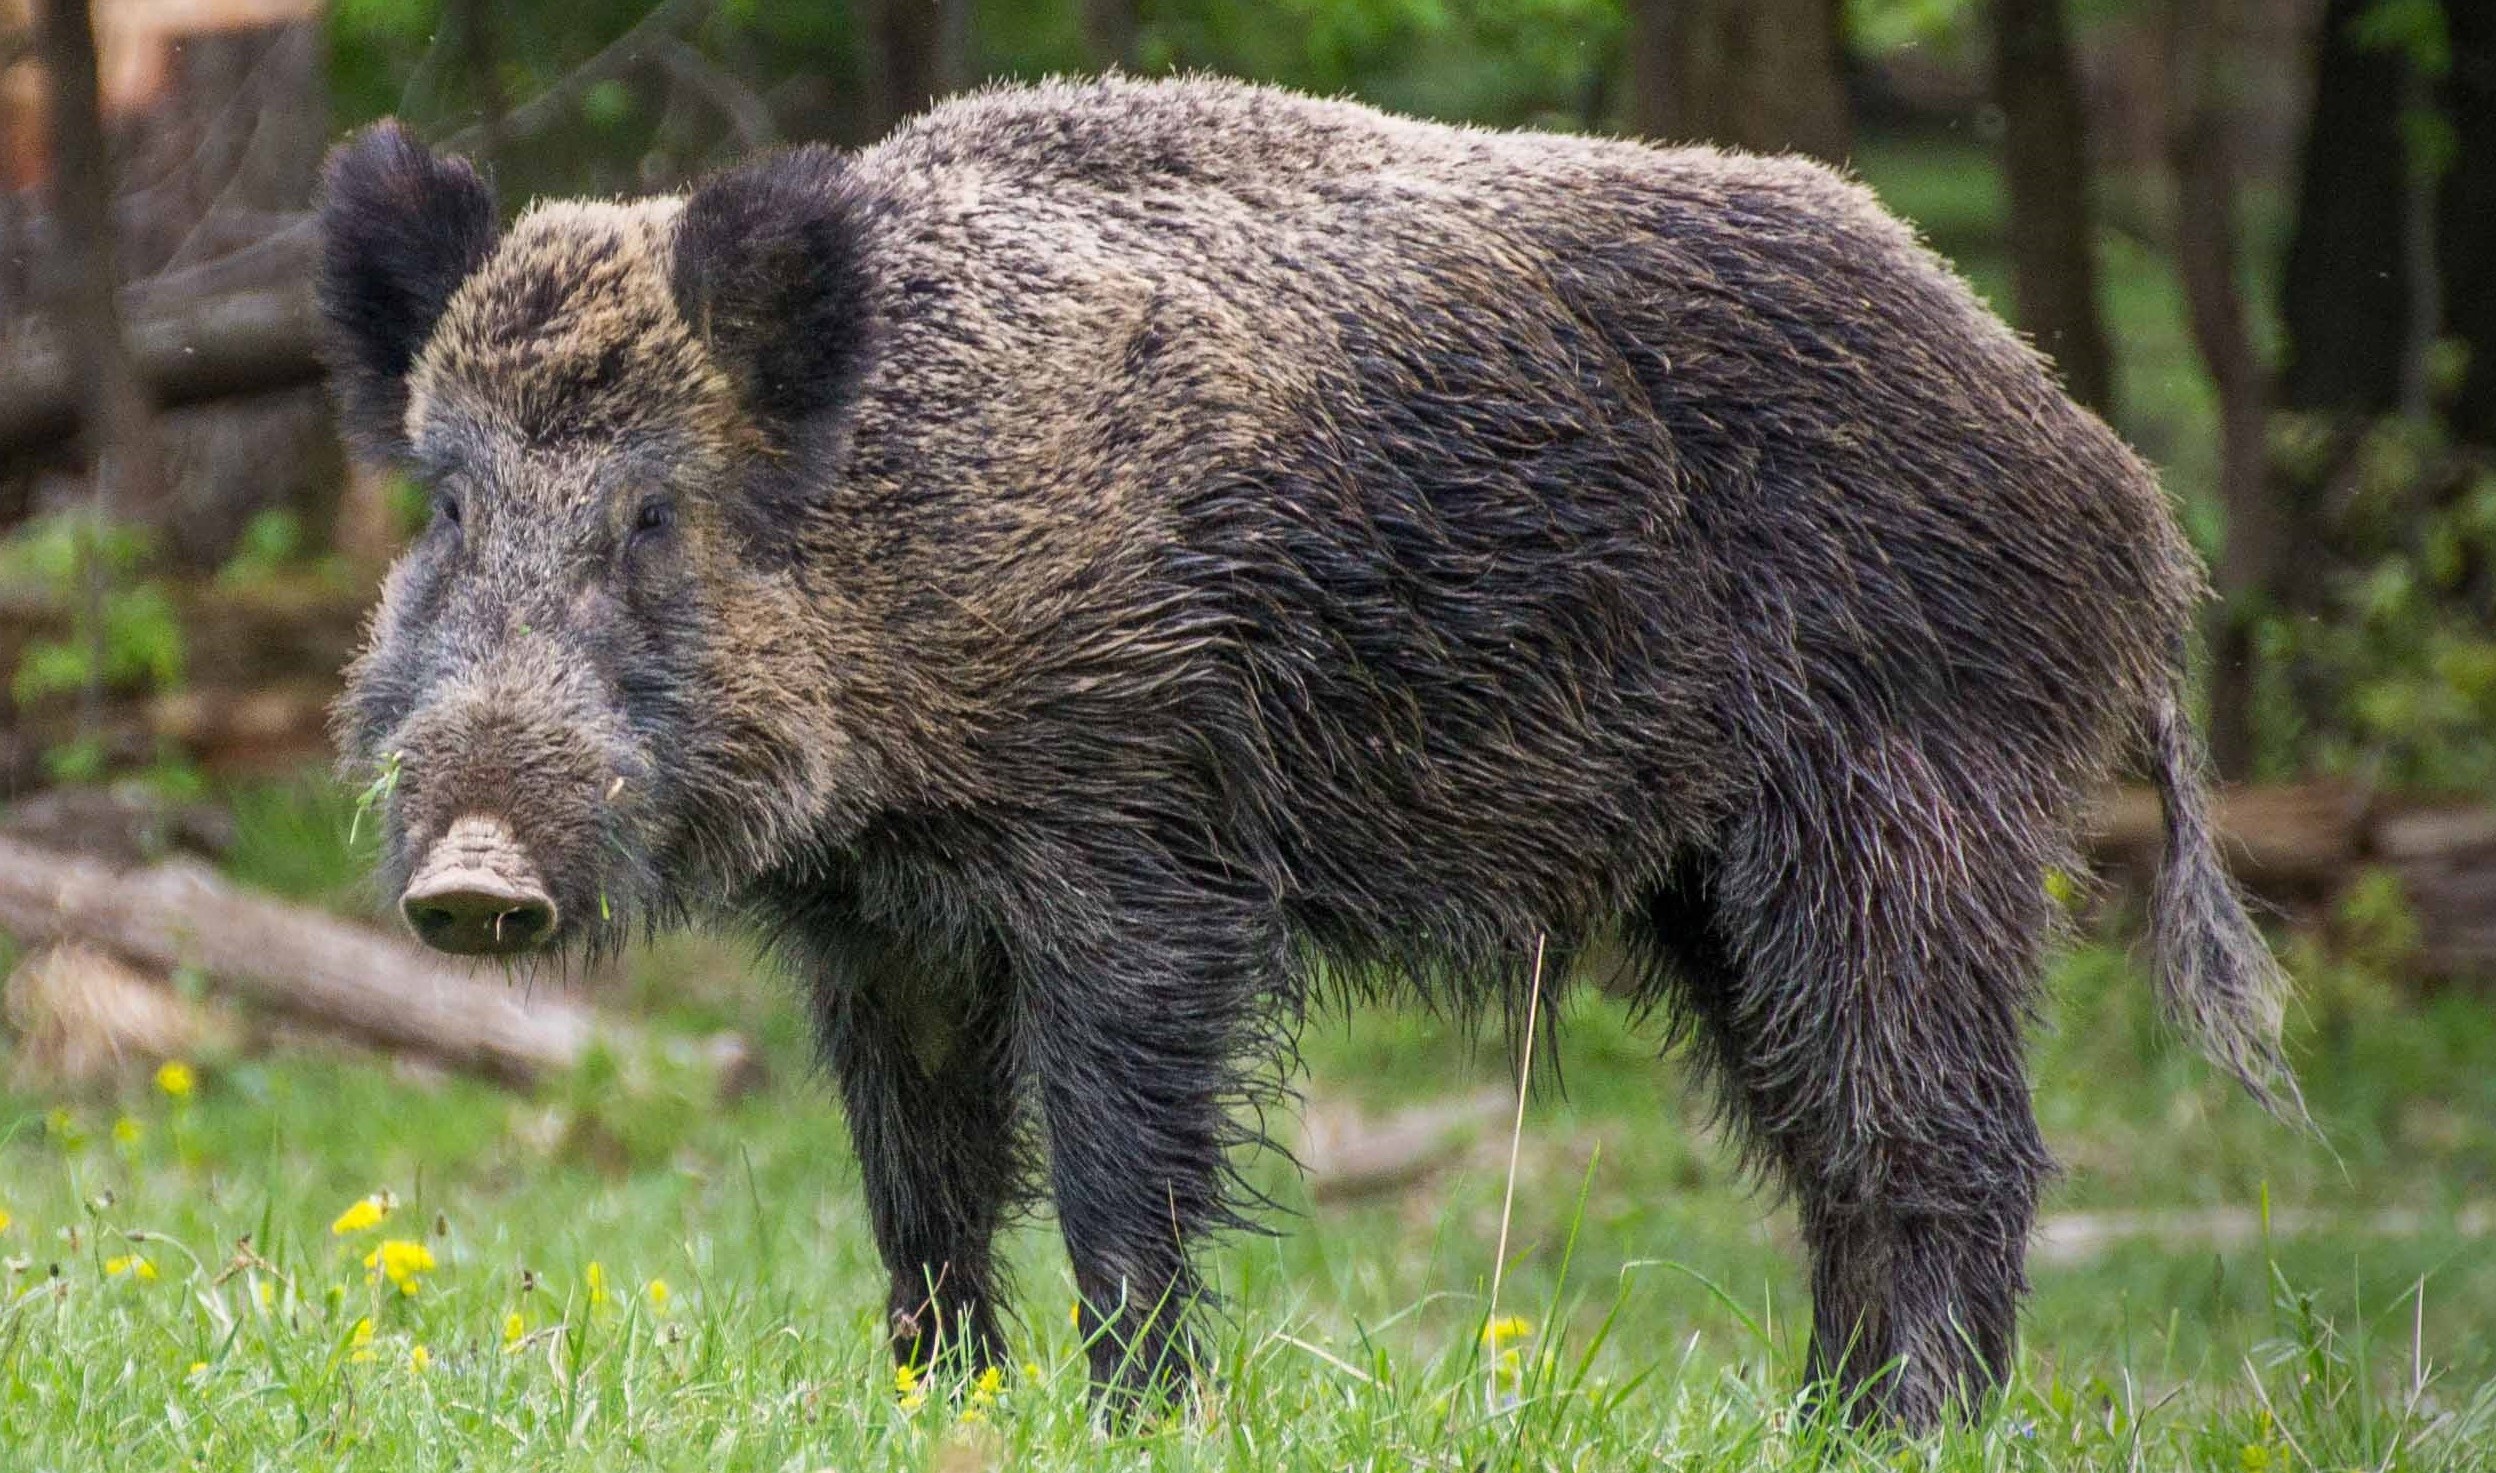 Farmers fined for catching wild boars in UP village